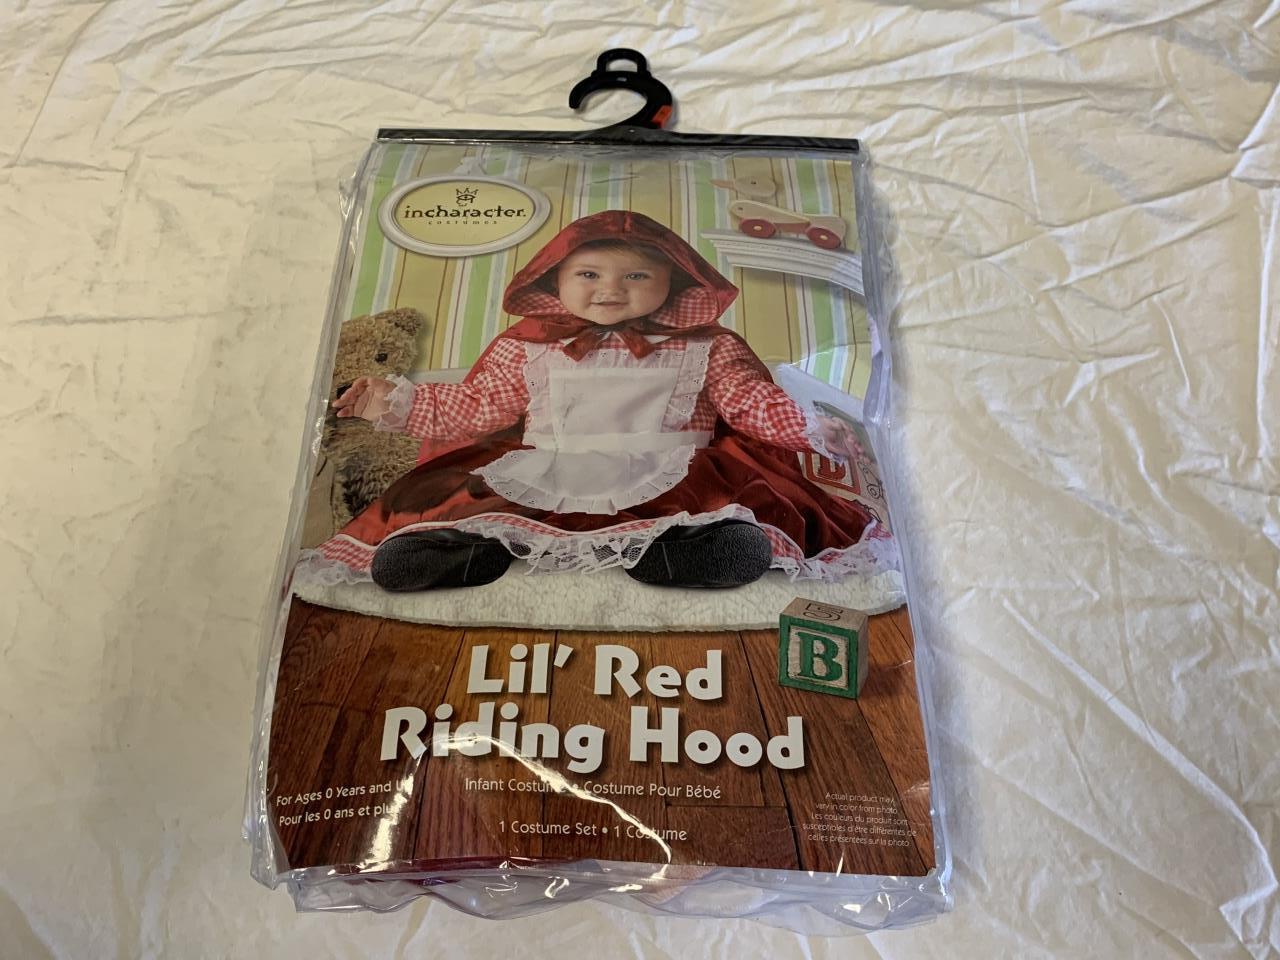 LIL RED RIDING HOOD Infant Costume NEW